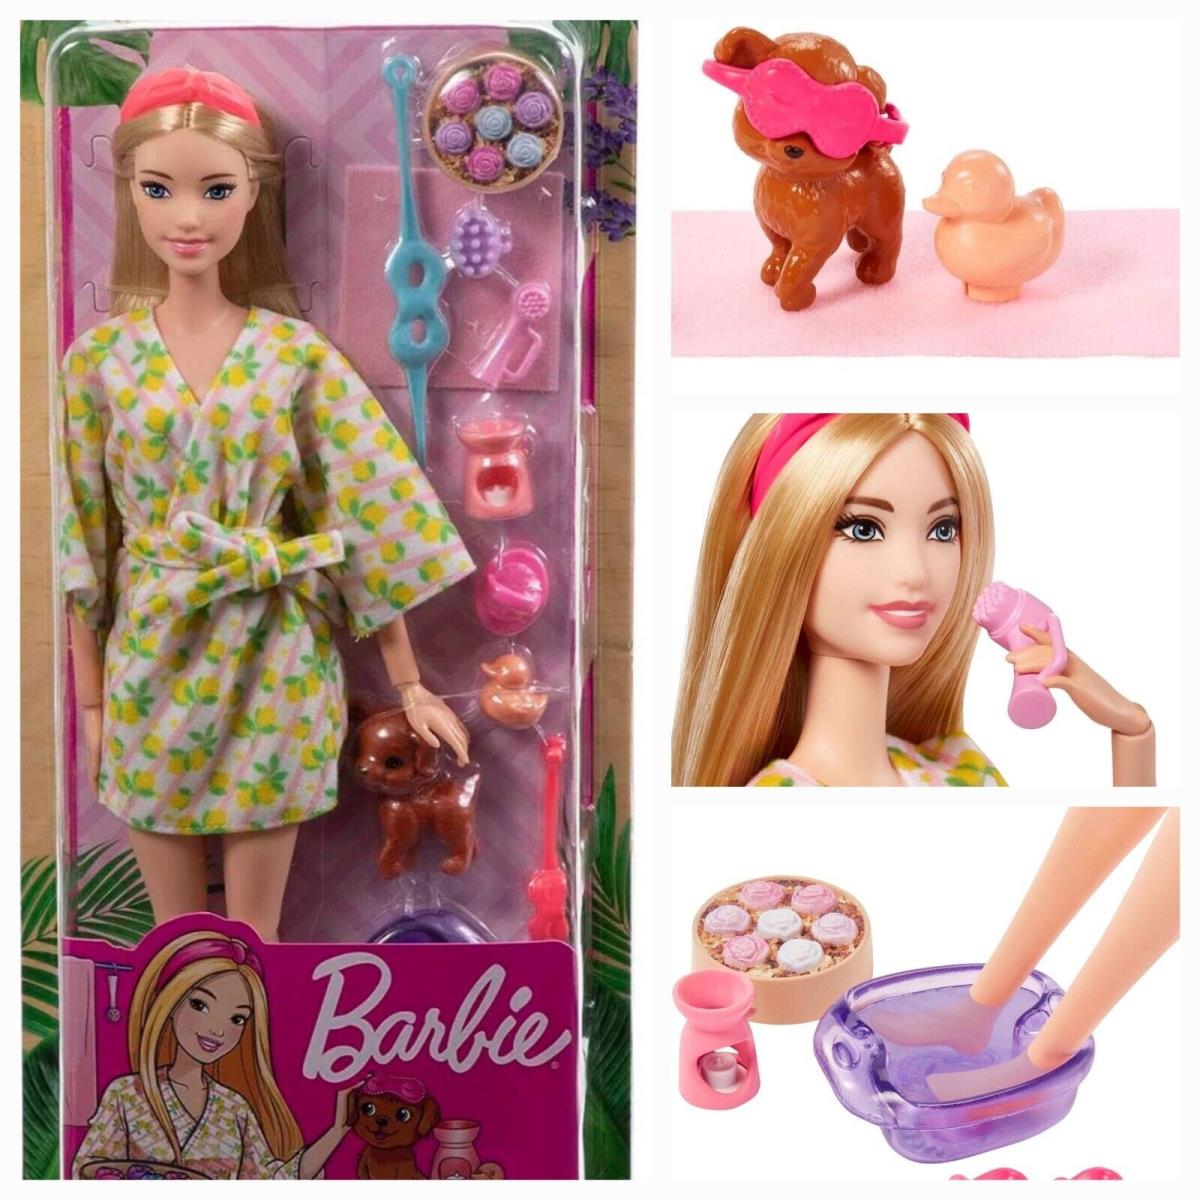 Barbie Spa Doll Straight Hair Beauty Clothing Accessories Pet Puppy Play Toy